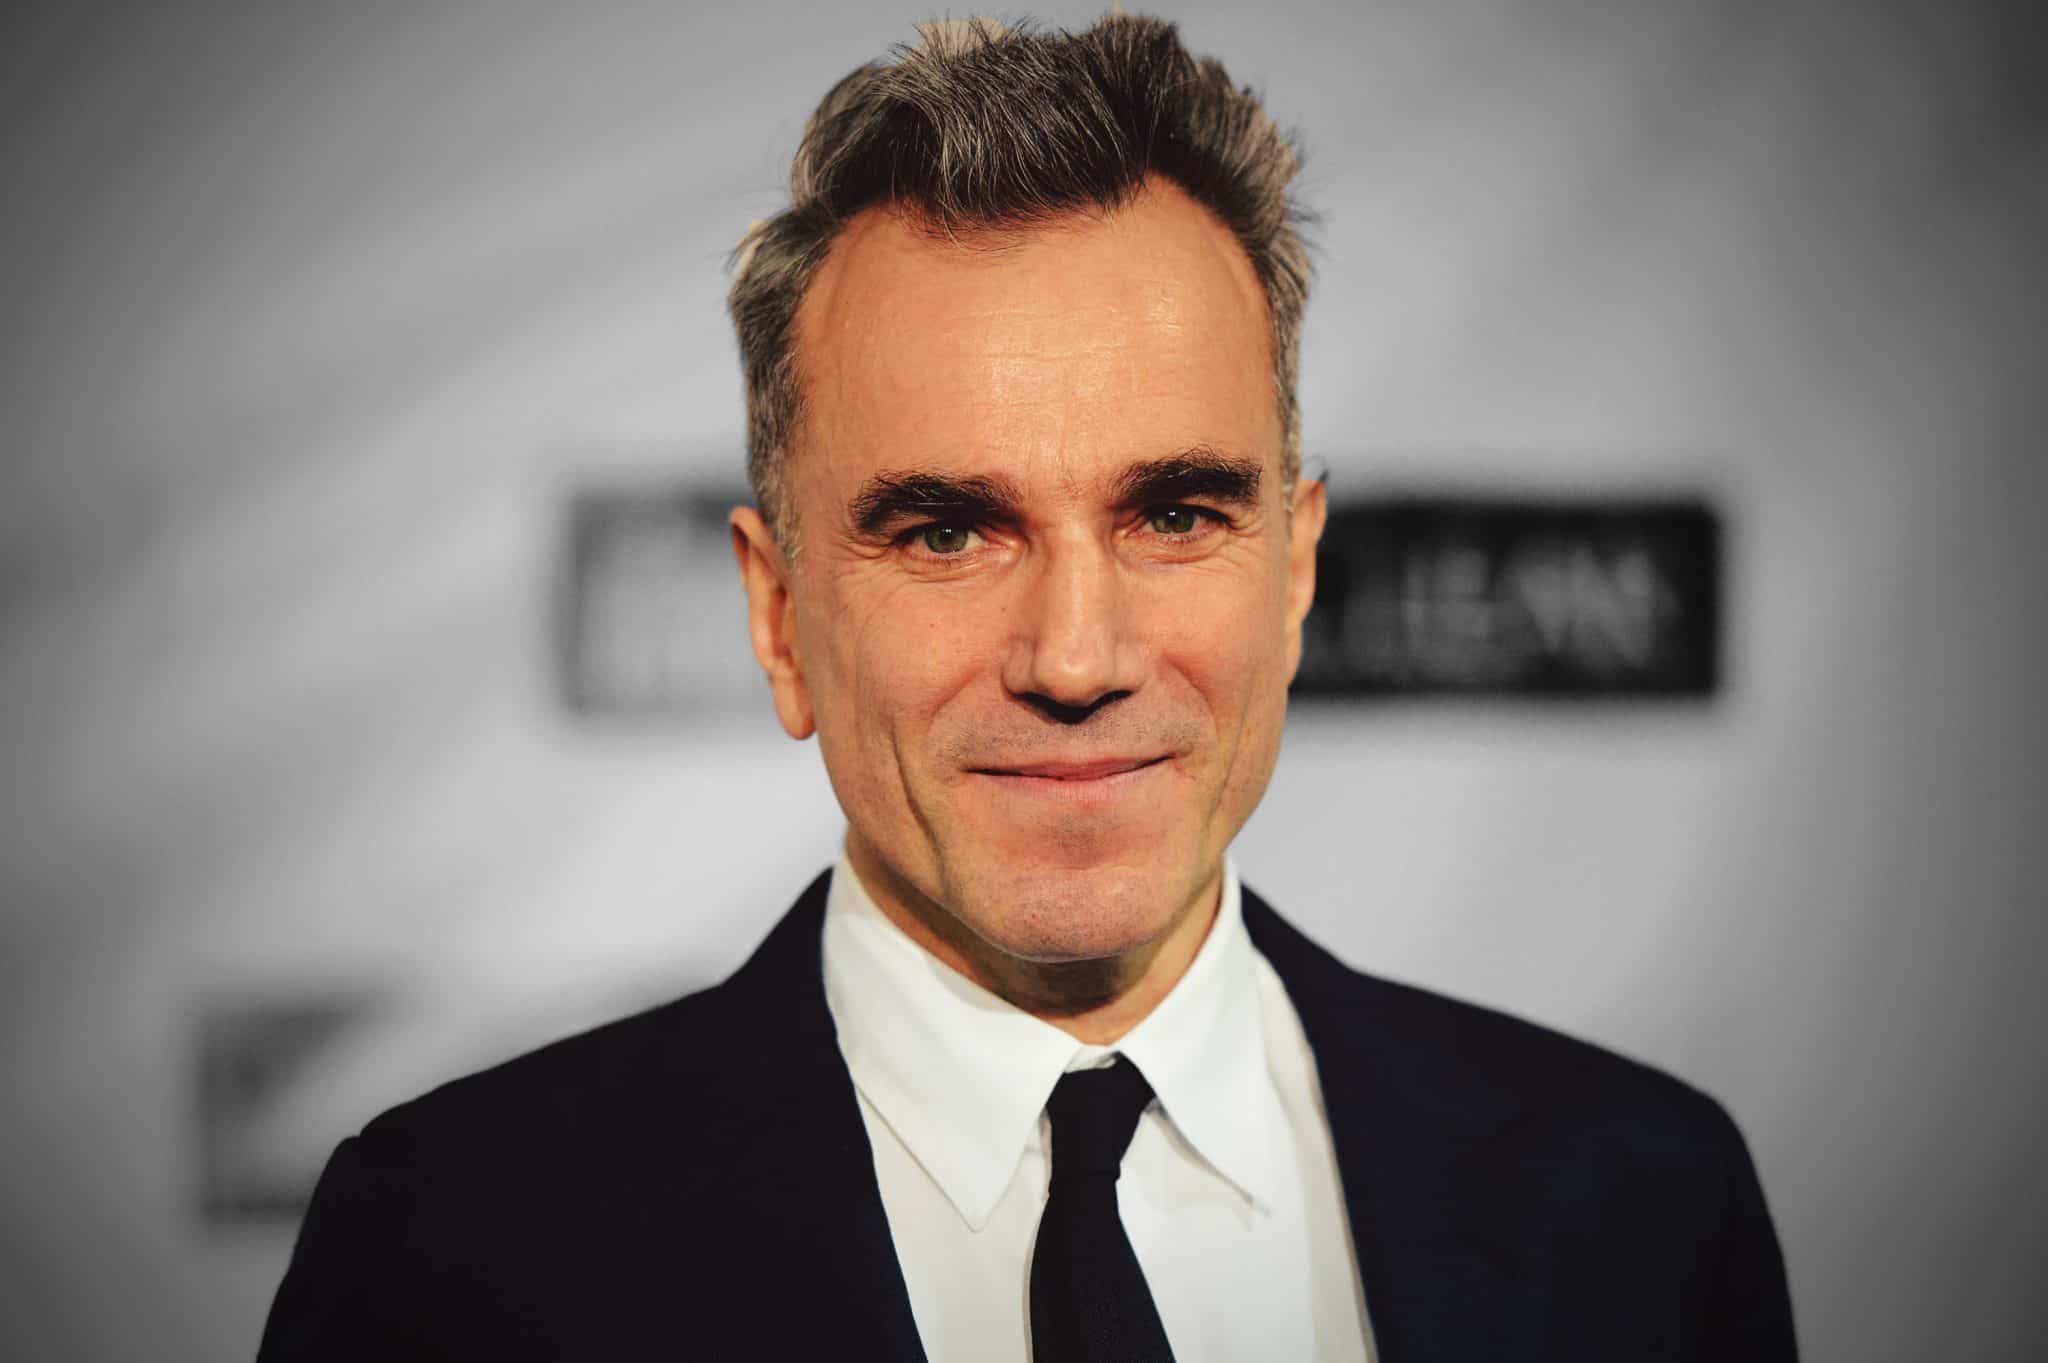 The Actor Who Plays Daniel Day-Lewis Announces His Retirement From The ...